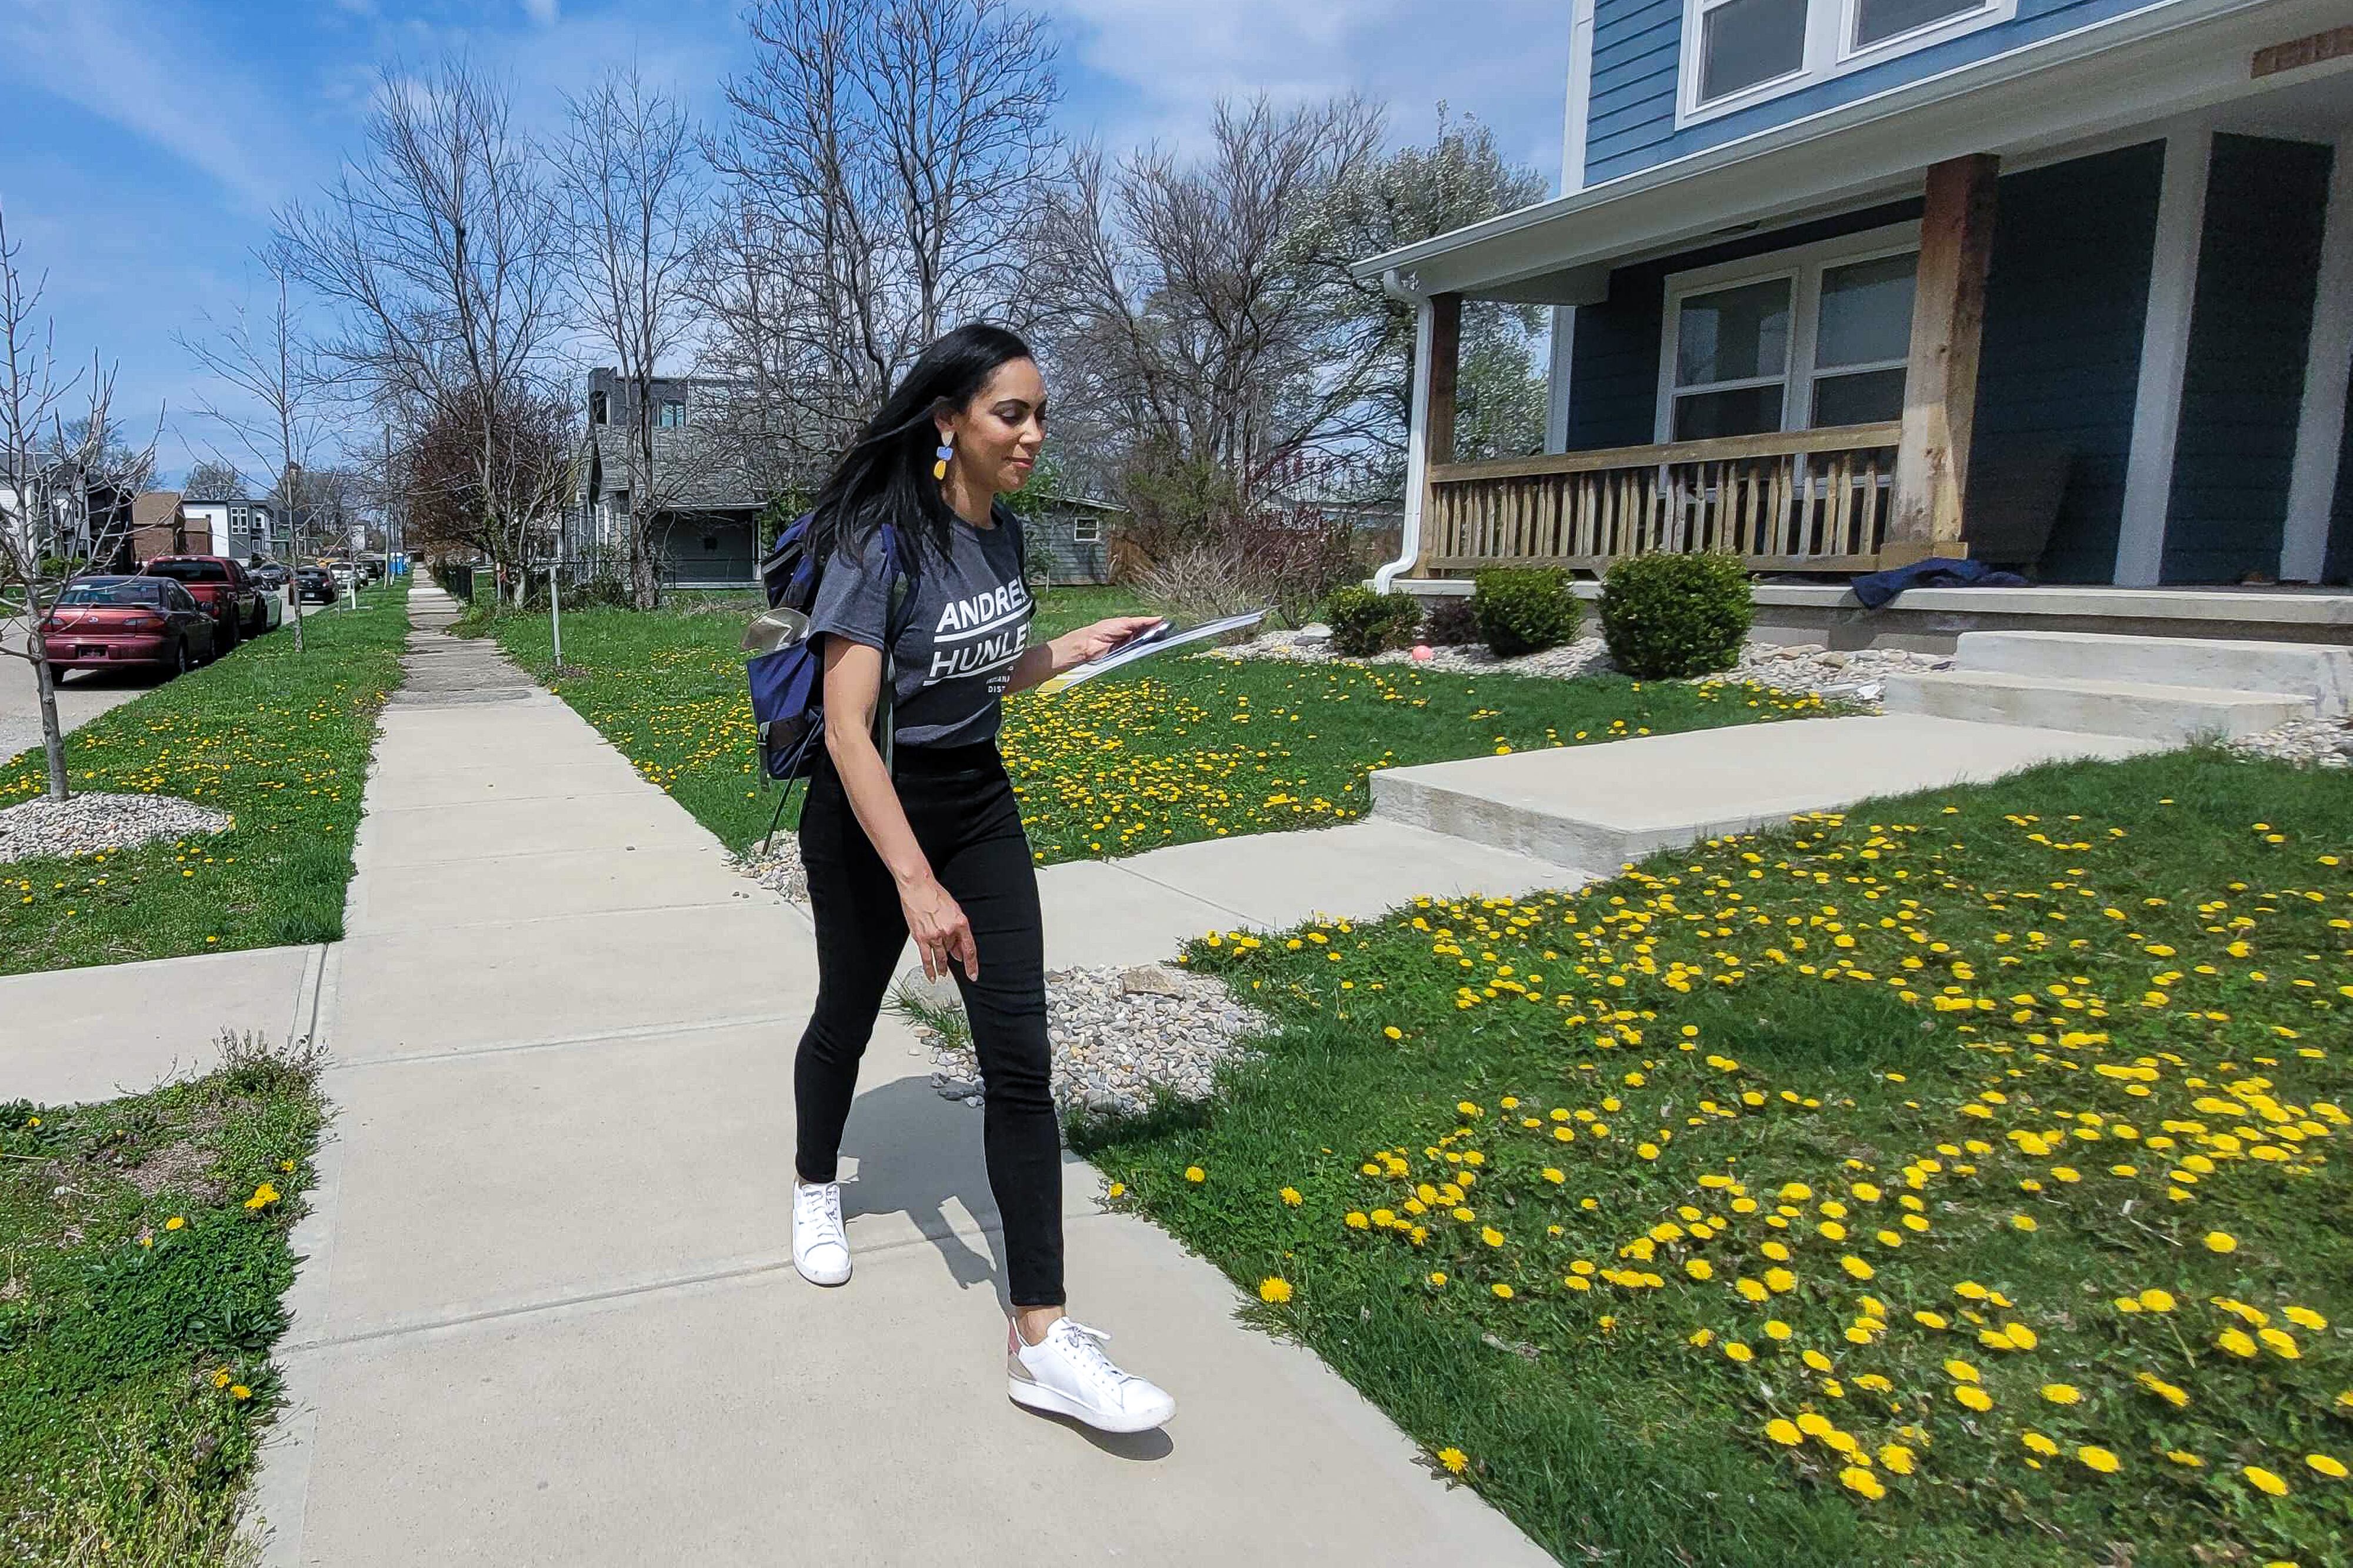 IPS principal Andrea Hunley, wearing a navy blue “Andrea Hunley” T-shirt, black stretch pants, and white athletic shoes, and carrying a clipboard and backpack, walks on a sidewalk past lawns in the Martindale-Brightwood as she campaign for state Senate.